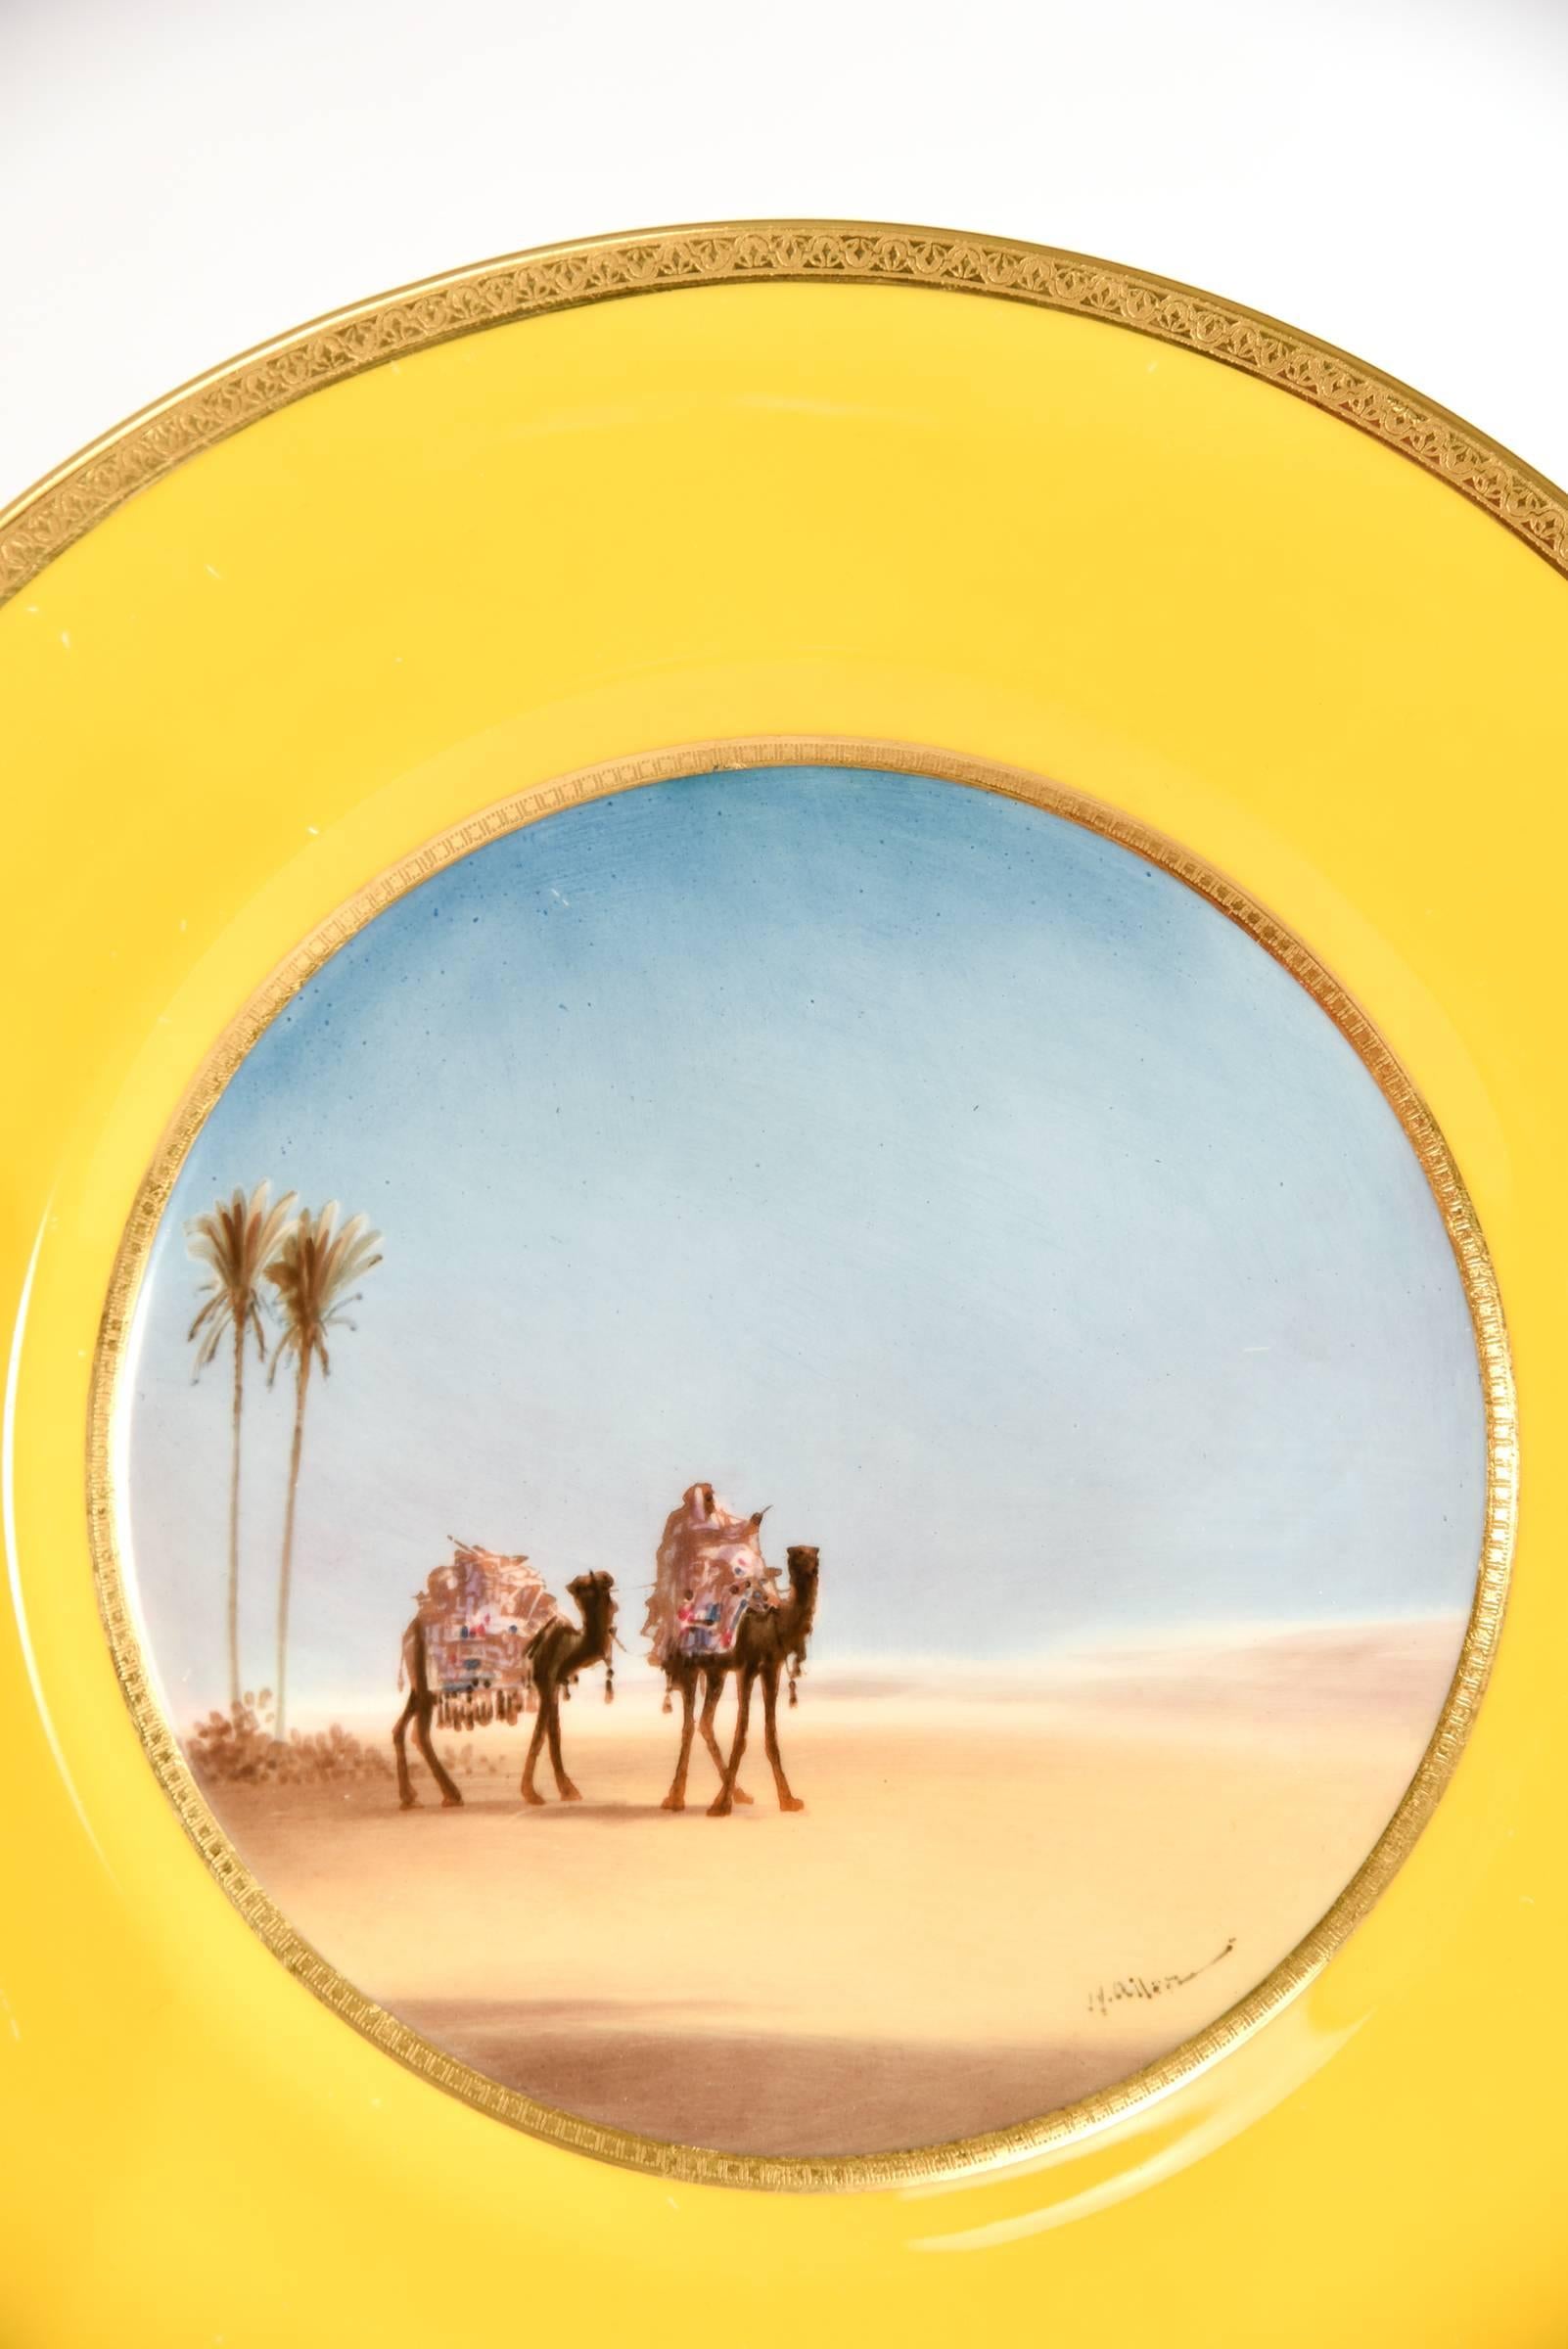 Hand-Painted 12 Royal Doulton Hand Painted Plates Signed H. Allen Desert Scenes with Camels